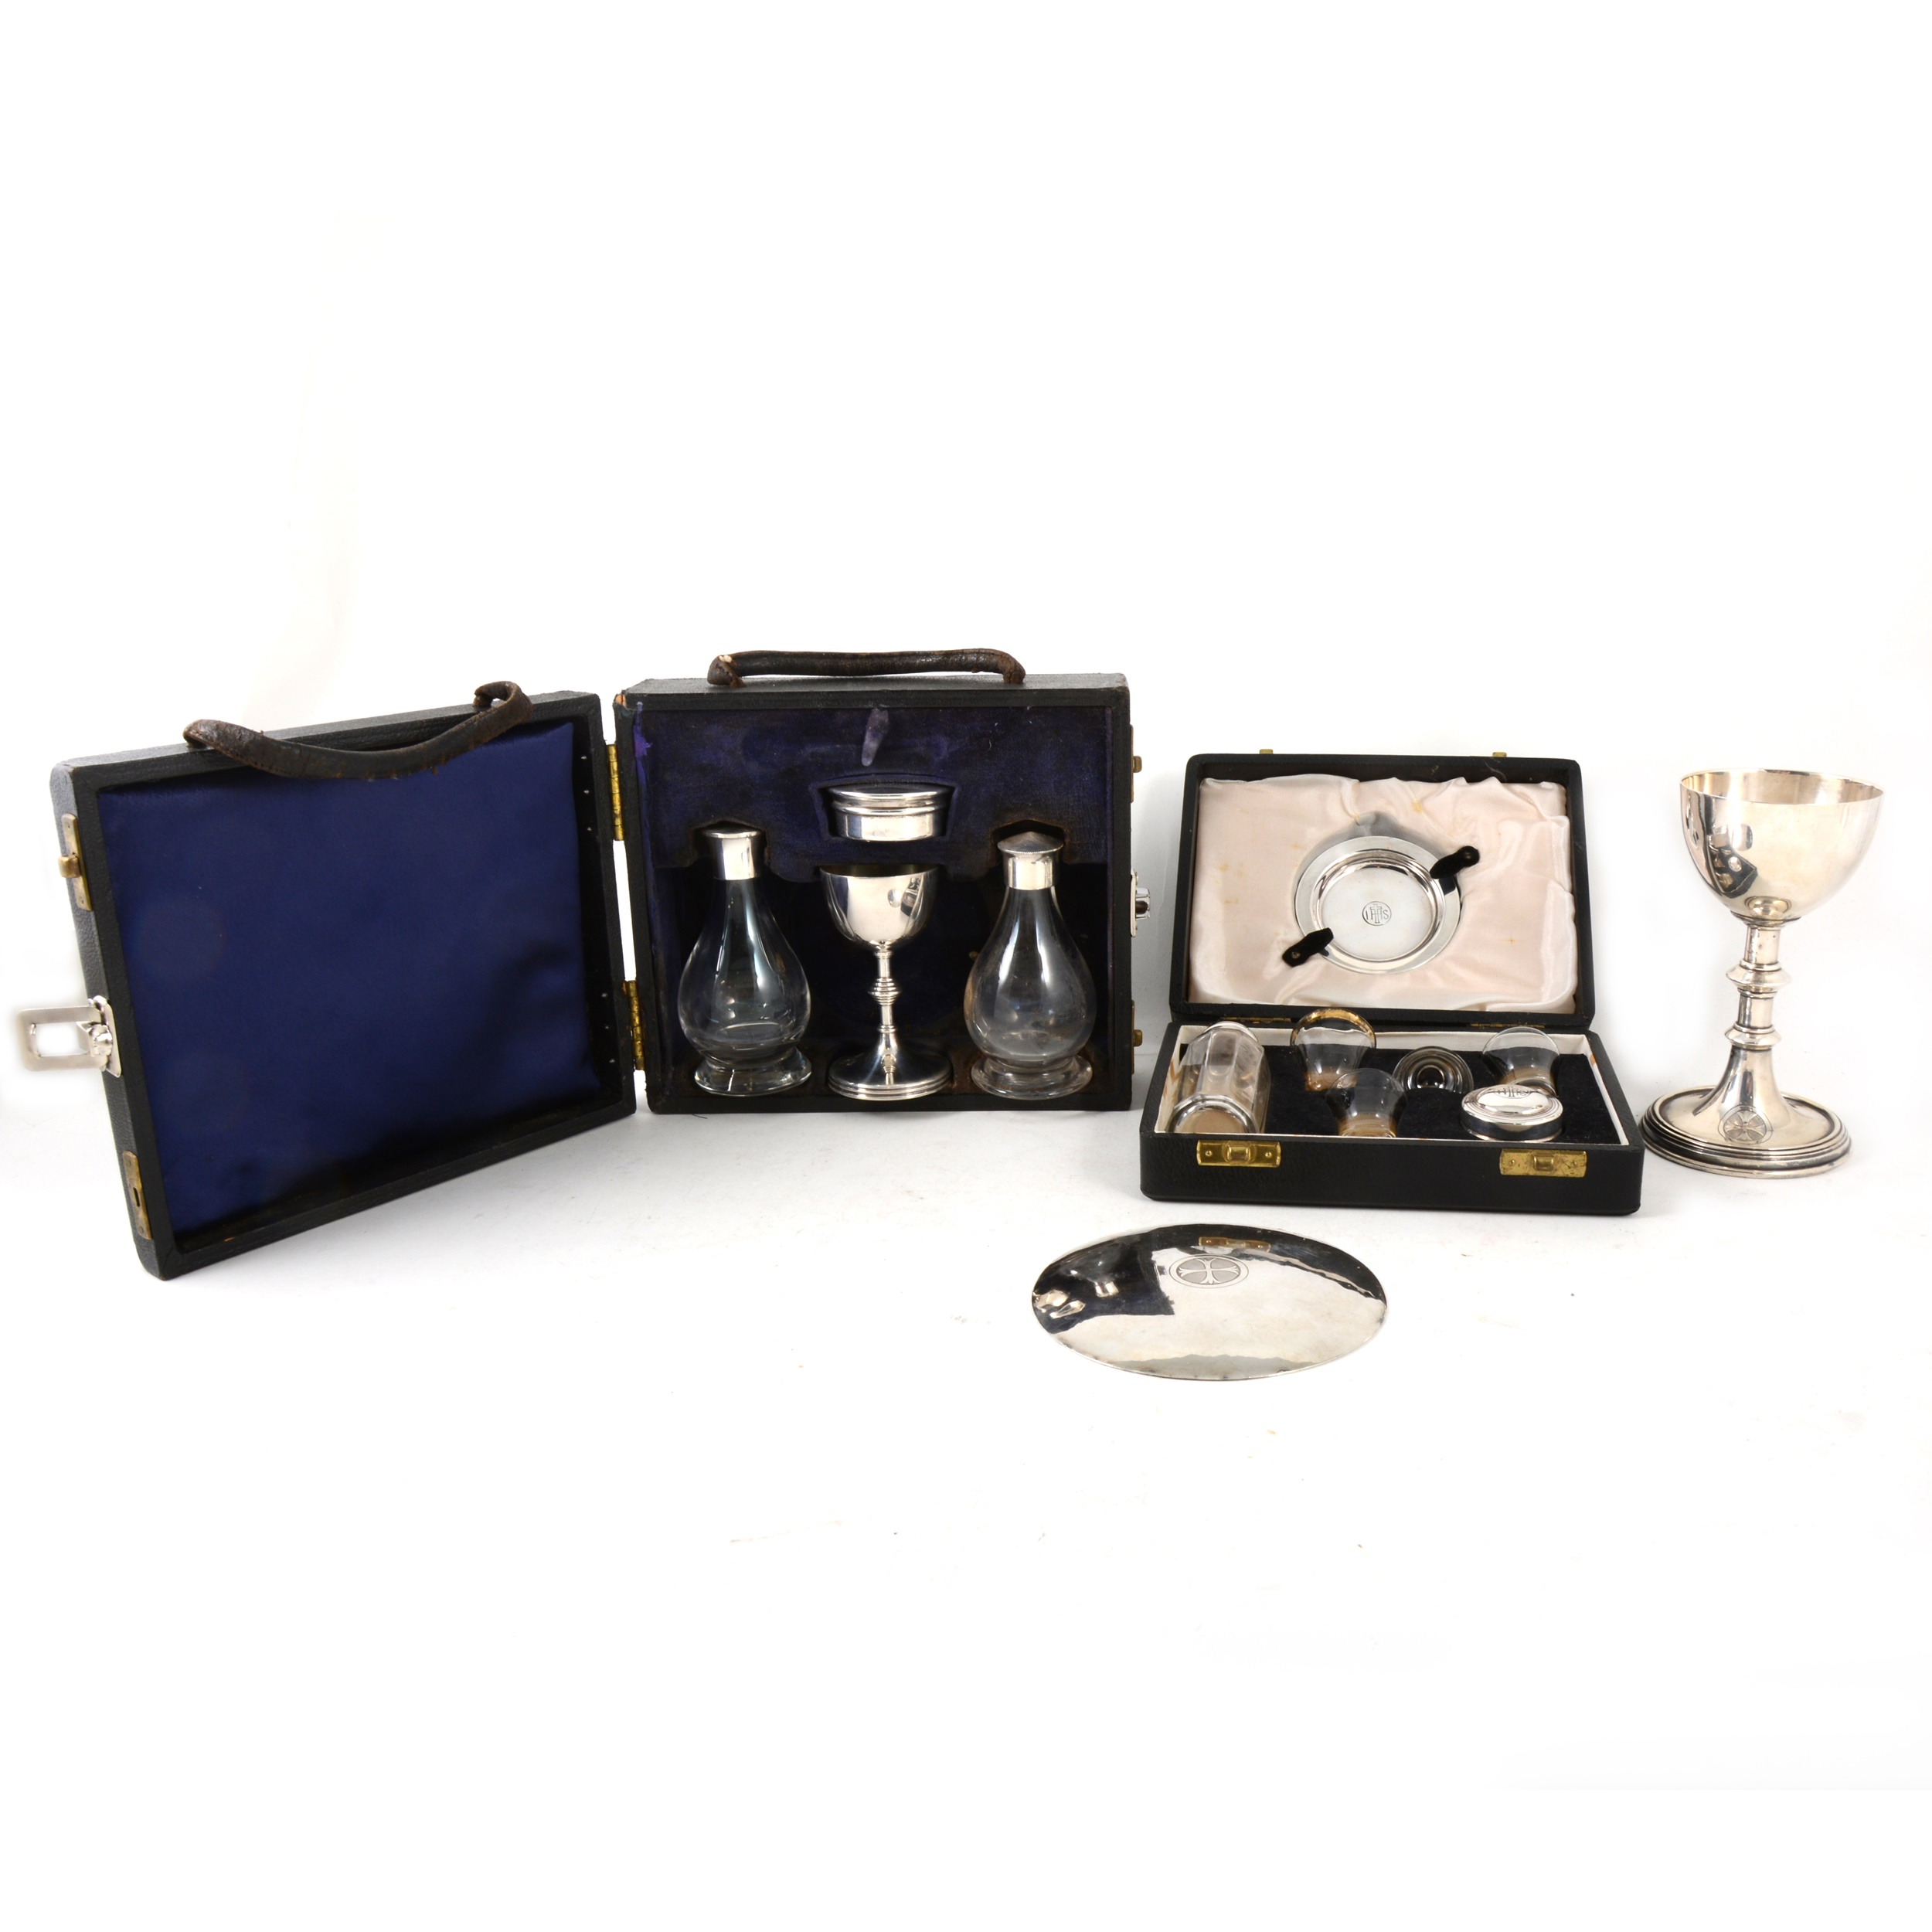 Two travelling communion sets, one silver, the other plated, and another paten and chalice.